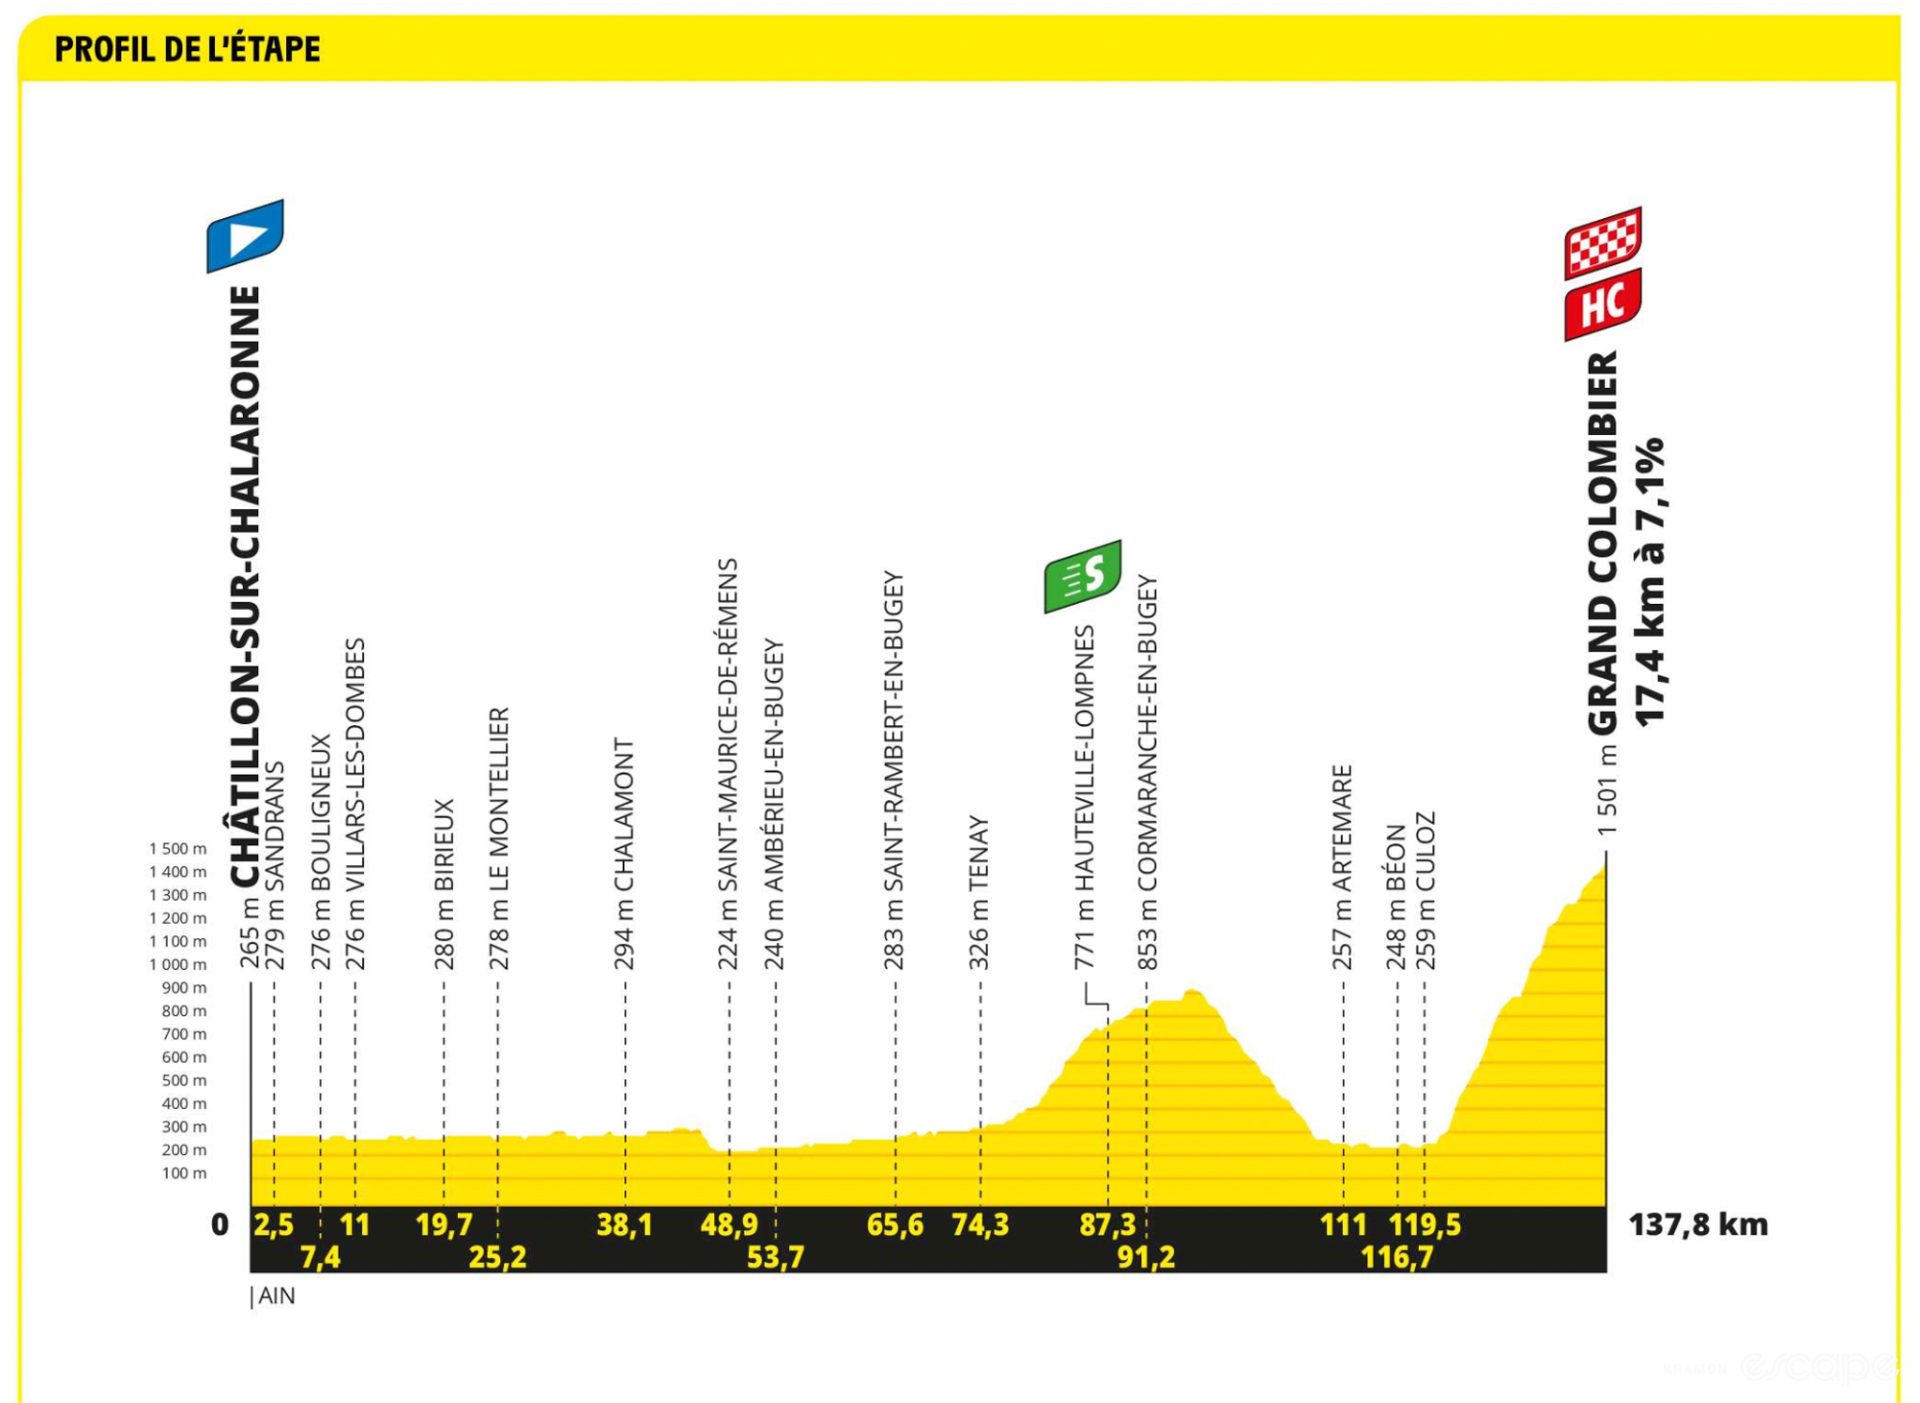 Preview Your stagebystage guide to the 2023 Tour de France route